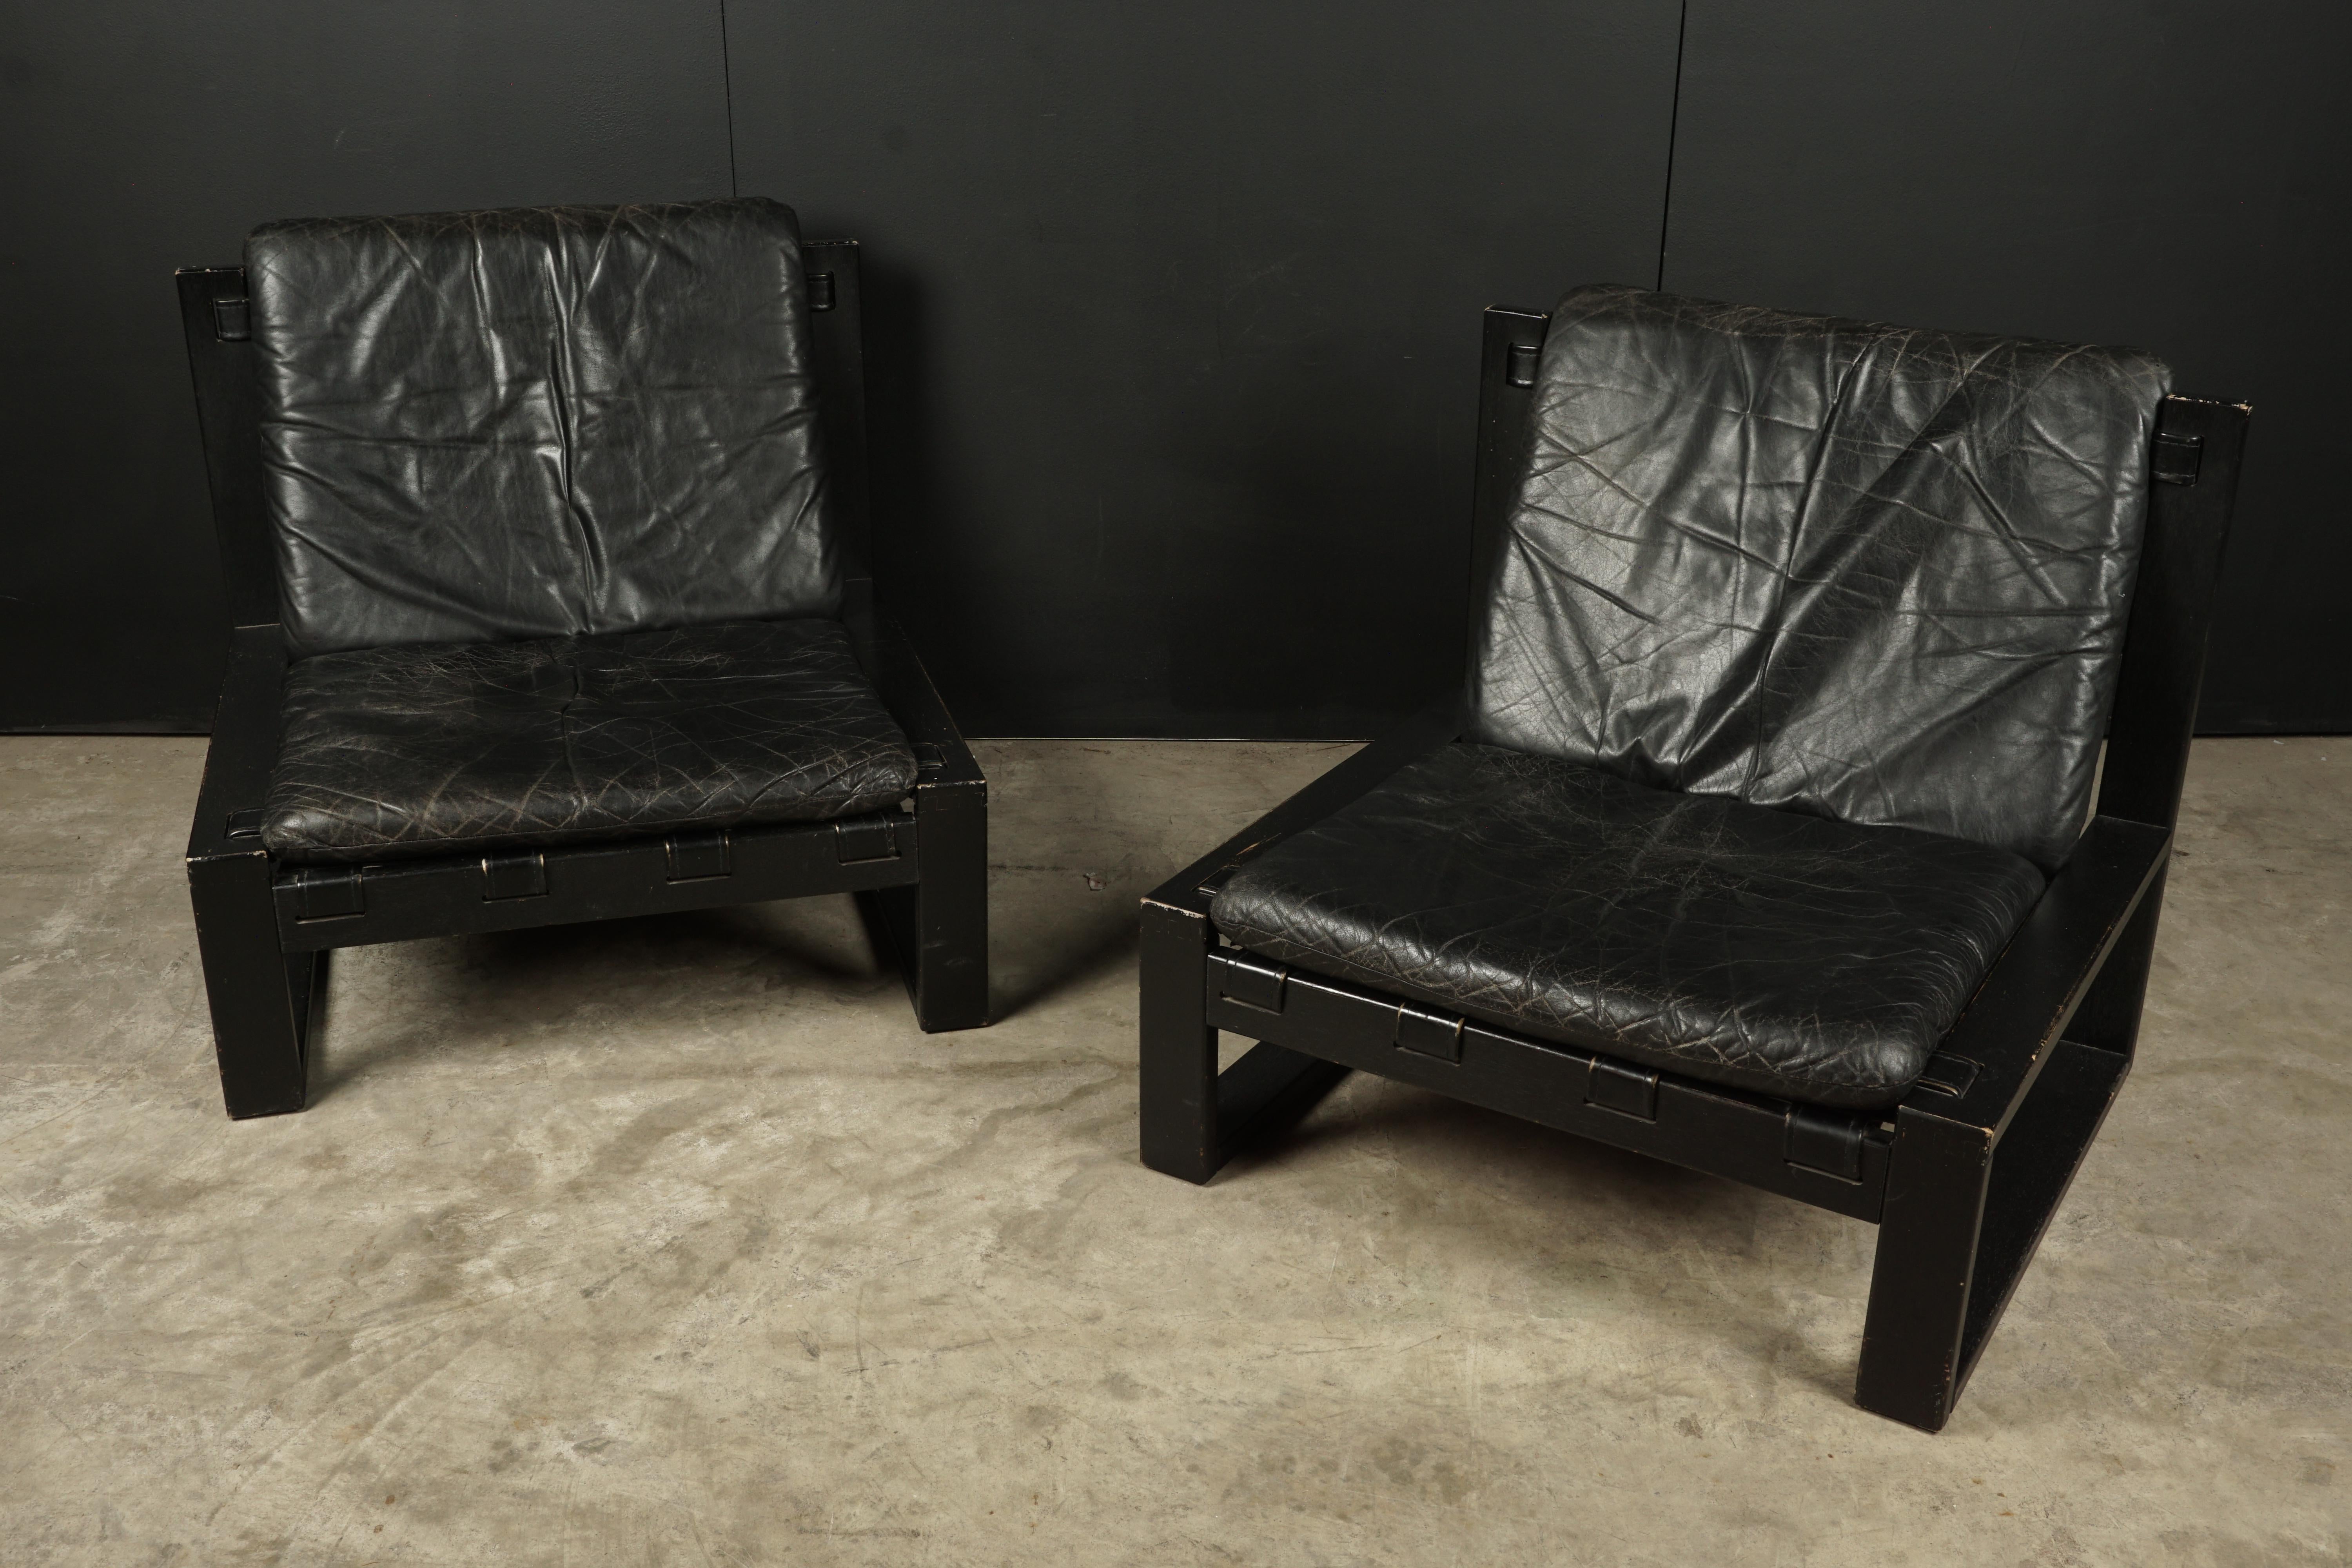 Pair of Dutch midcentury lounge chairs by Sonja Wasseur, Netherlands, 1970s. Black lacquered wooden frames with original black leather cushions.